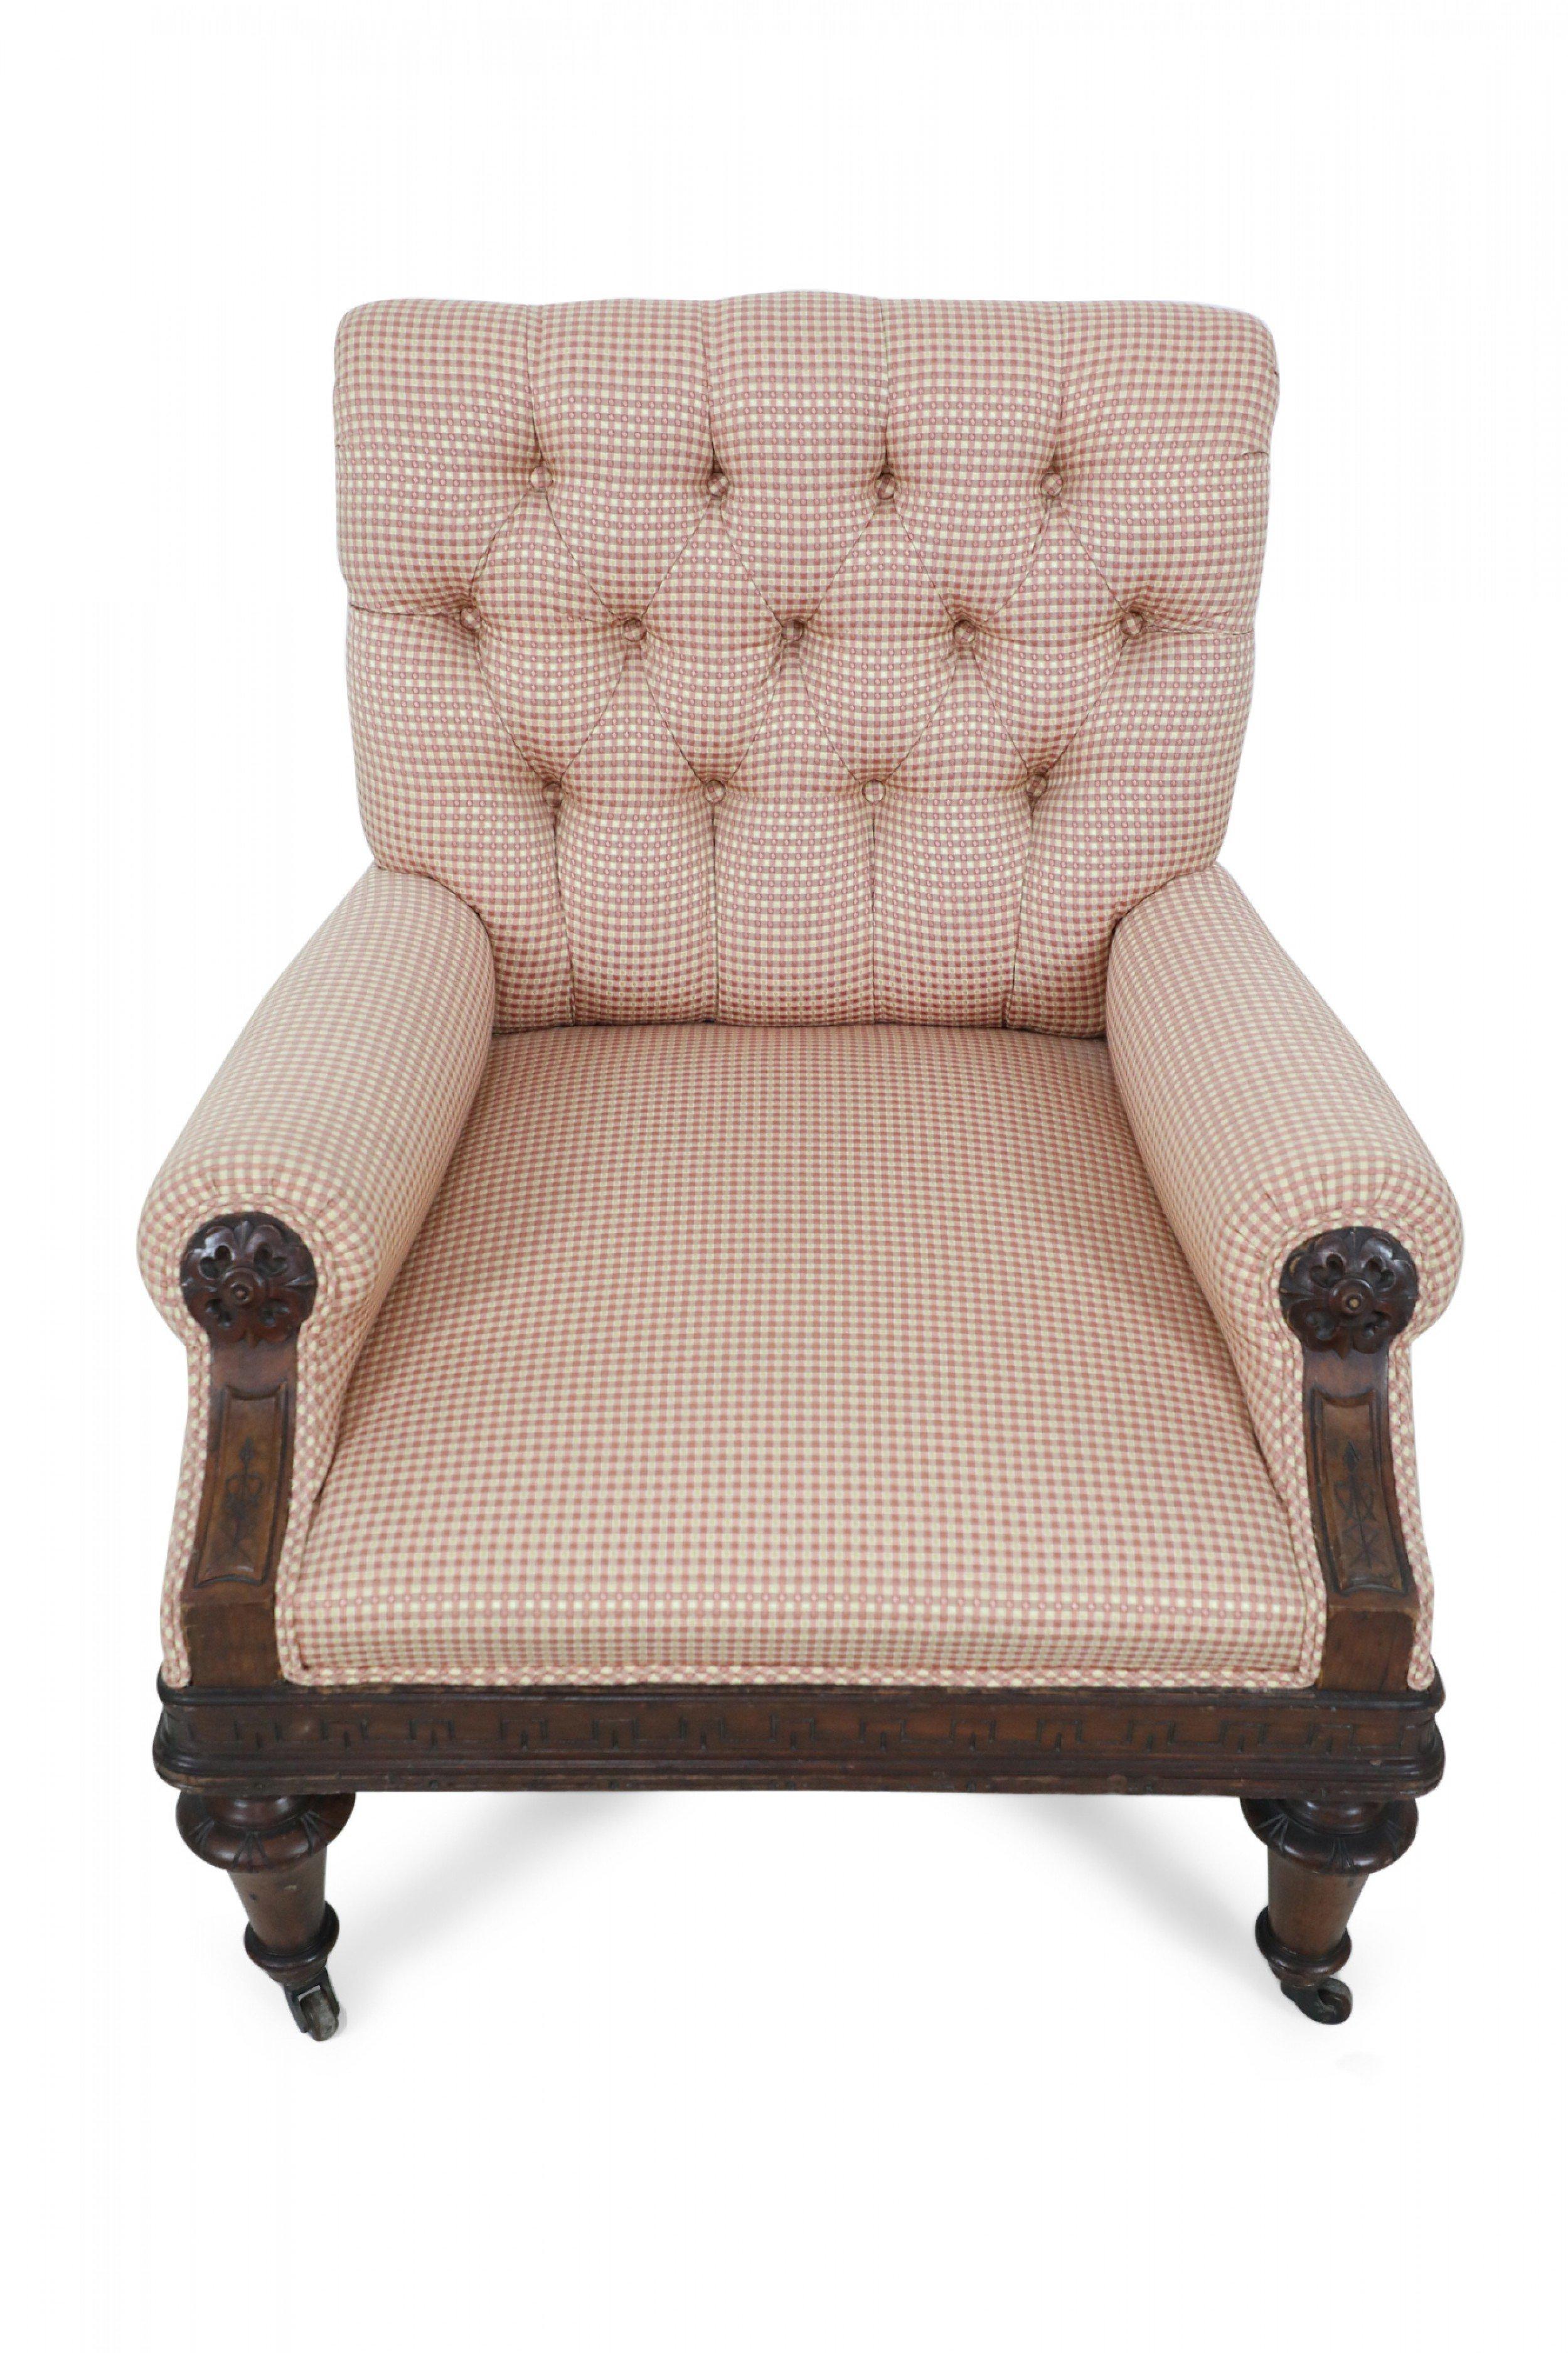 American Victorian Tufted Upholstered Red and Beige Checkered Mahogany Armchair For Sale 2